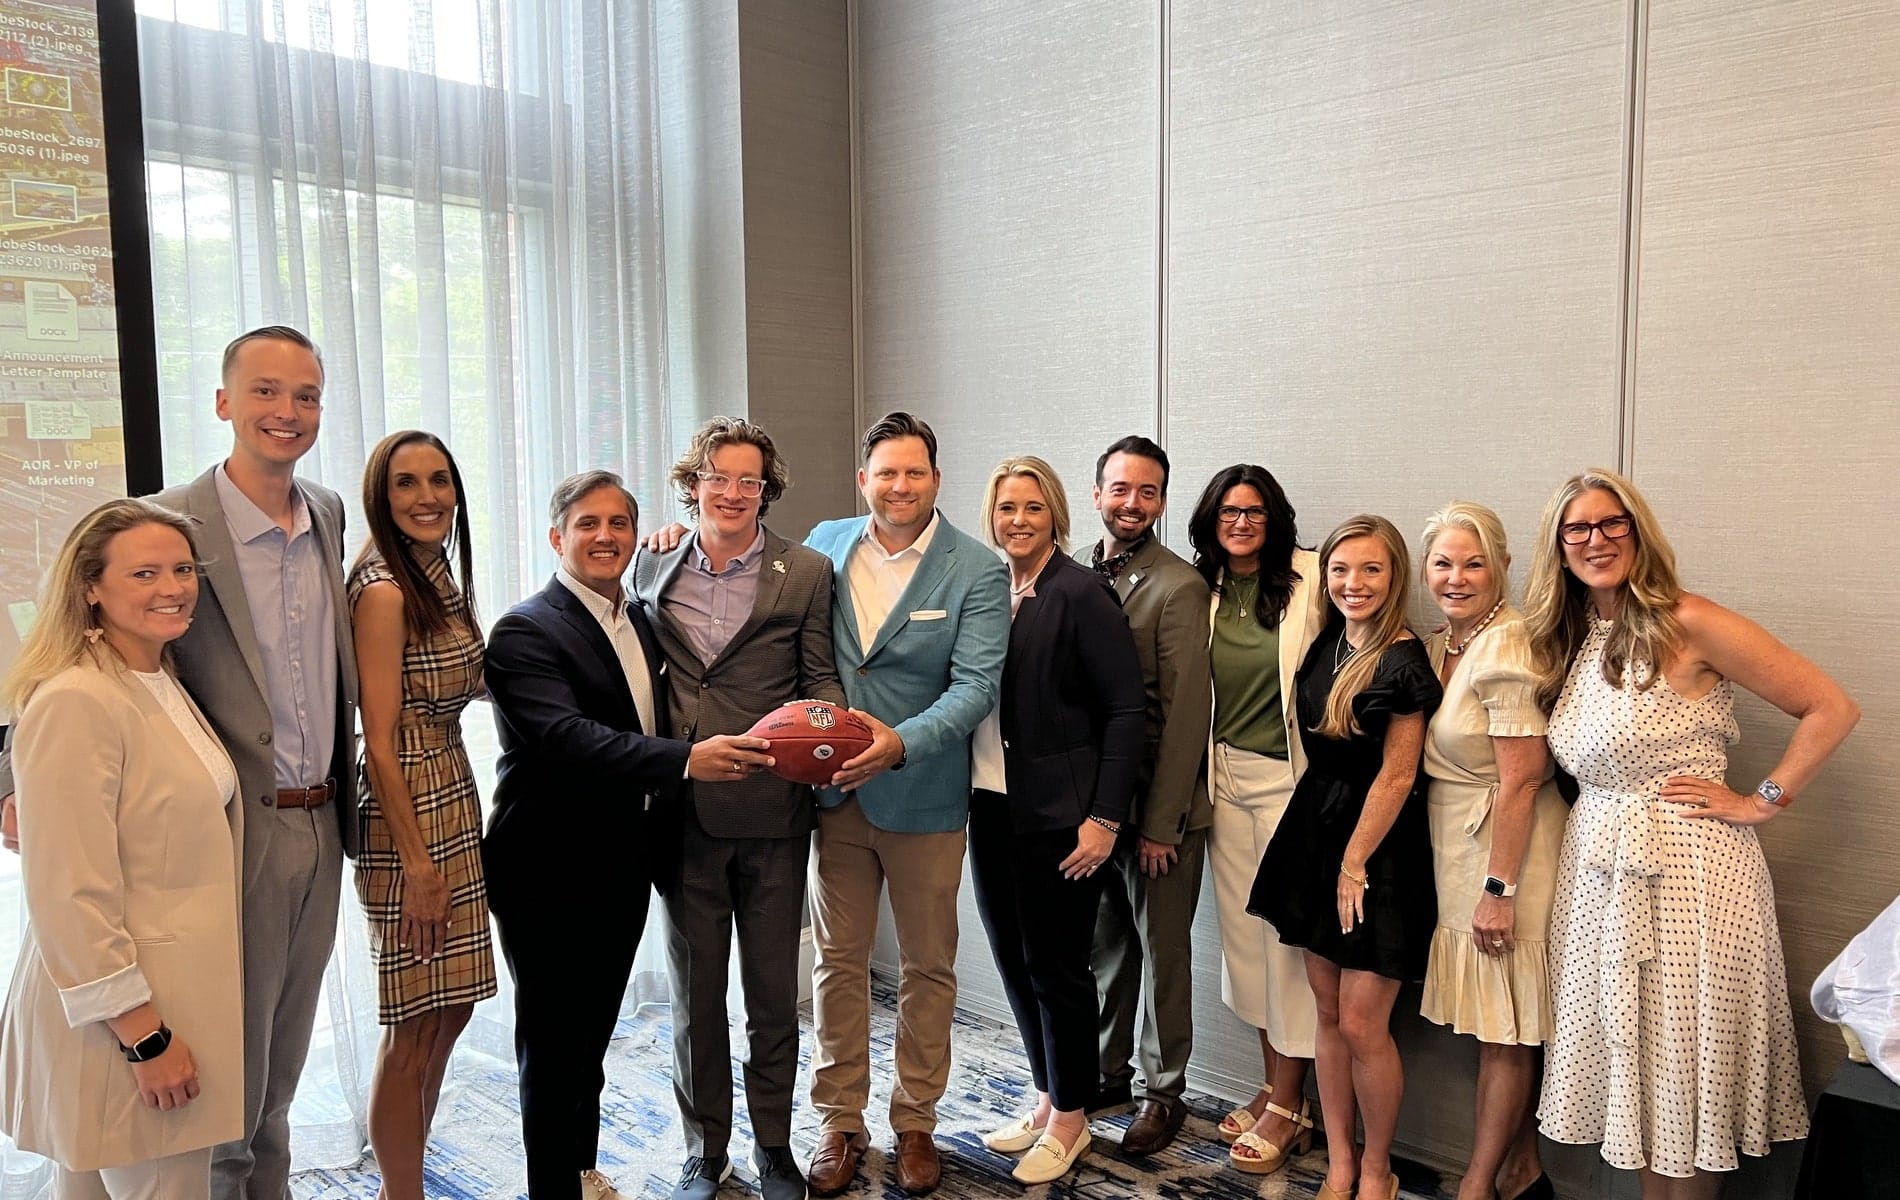 CORCORAN REVERIE EXPANDS TO NASHVILLE & BECOMES OFFICIAL REAL ESTATE BROKERAGE FOR THE NFL’S TENNESSEE TITANS